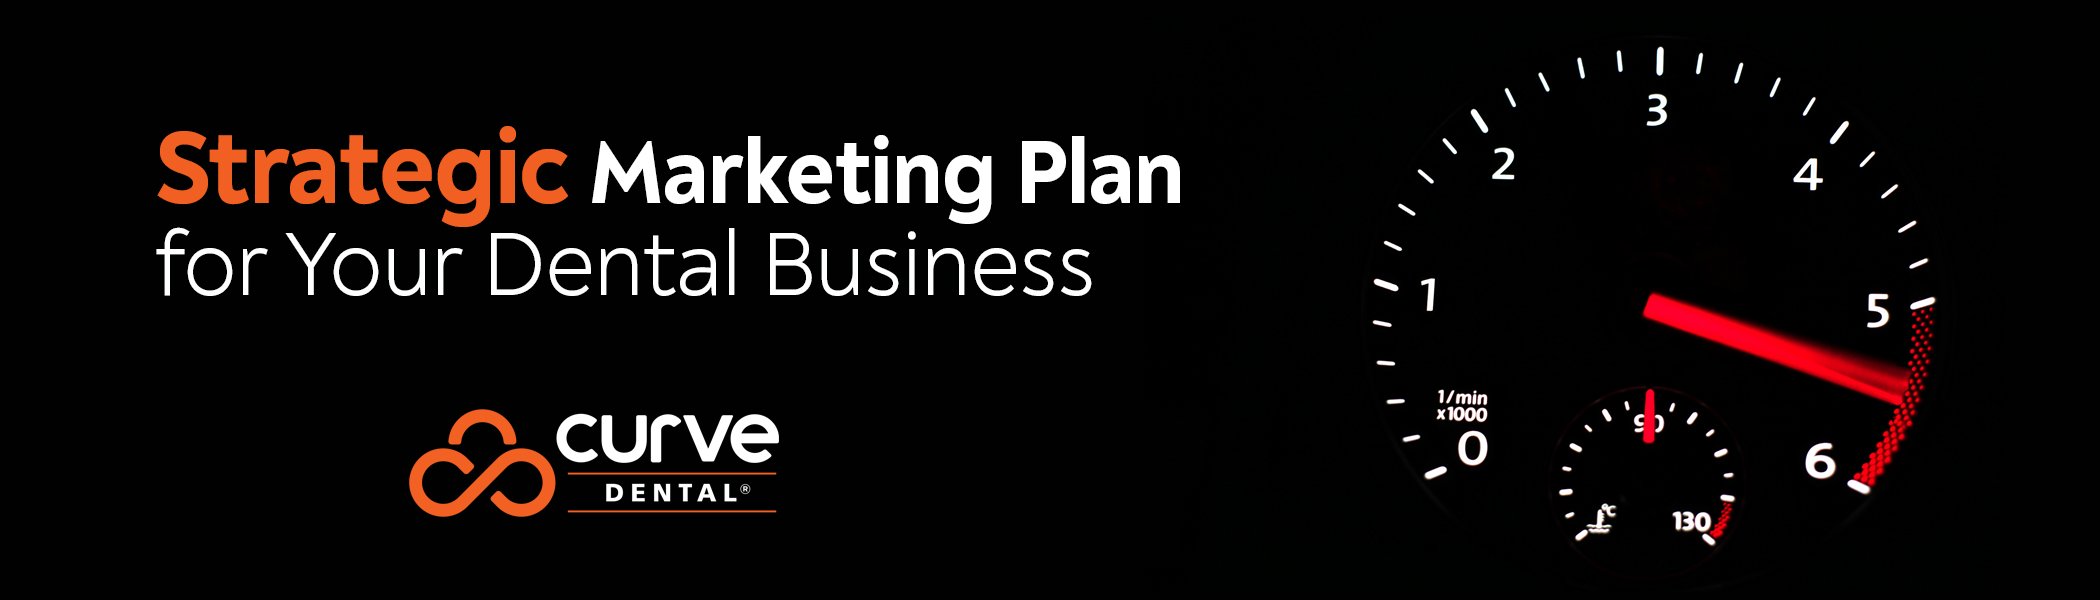 Rev Up Your Dental Business with a Strong Strategic Marketing Plan